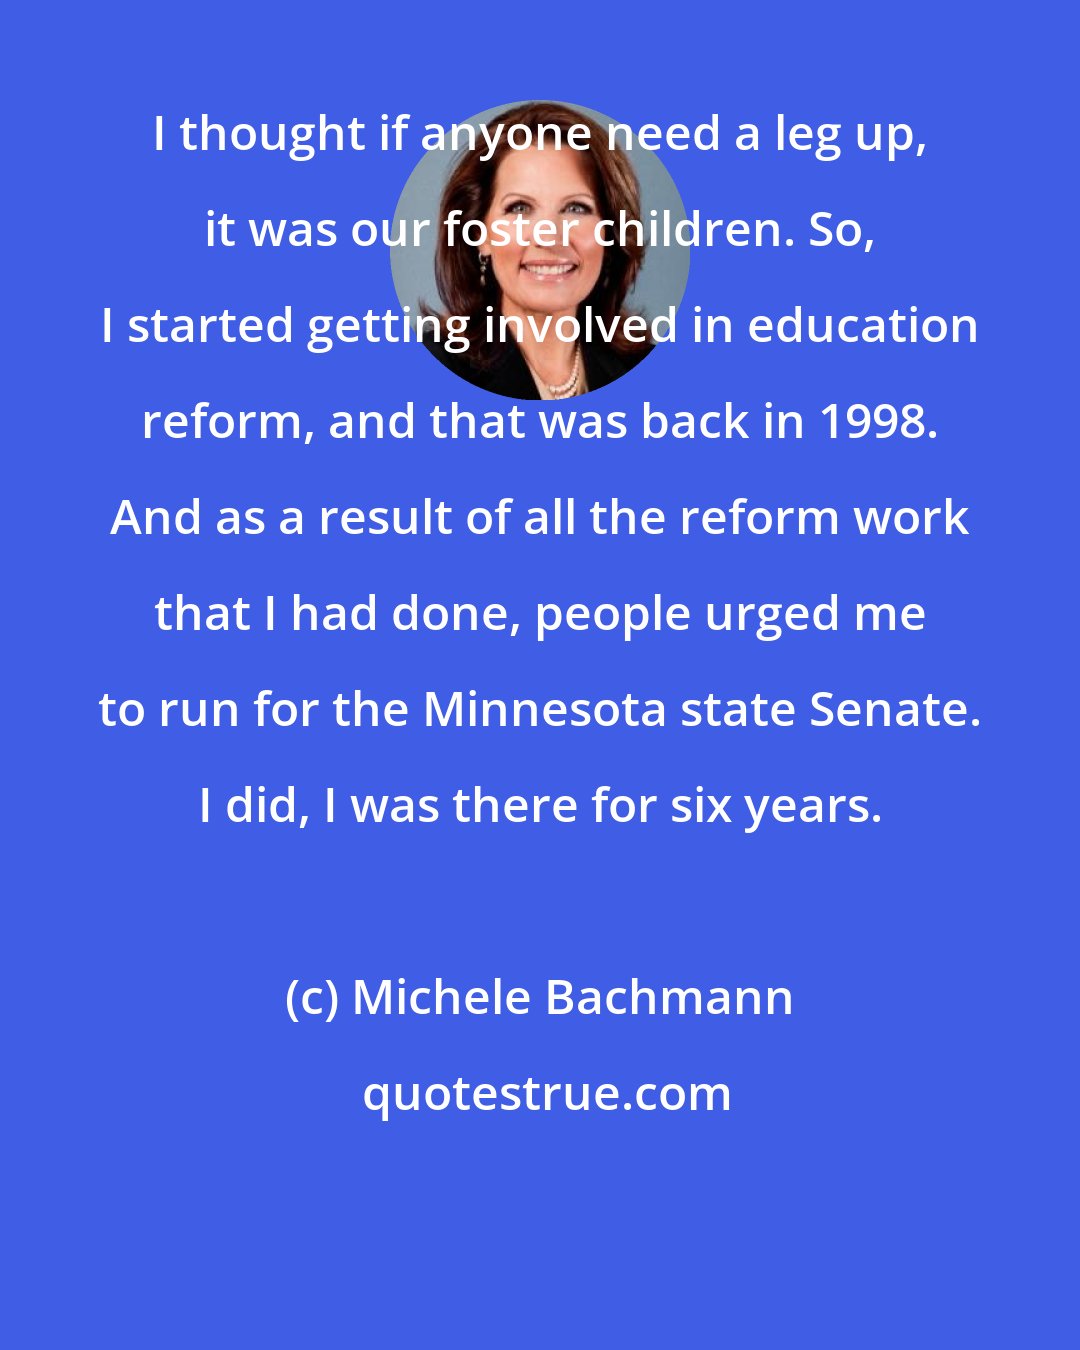 Michele Bachmann: I thought if anyone need a leg up, it was our foster children. So, I started getting involved in education reform, and that was back in 1998. And as a result of all the reform work that I had done, people urged me to run for the Minnesota state Senate. I did, I was there for six years.